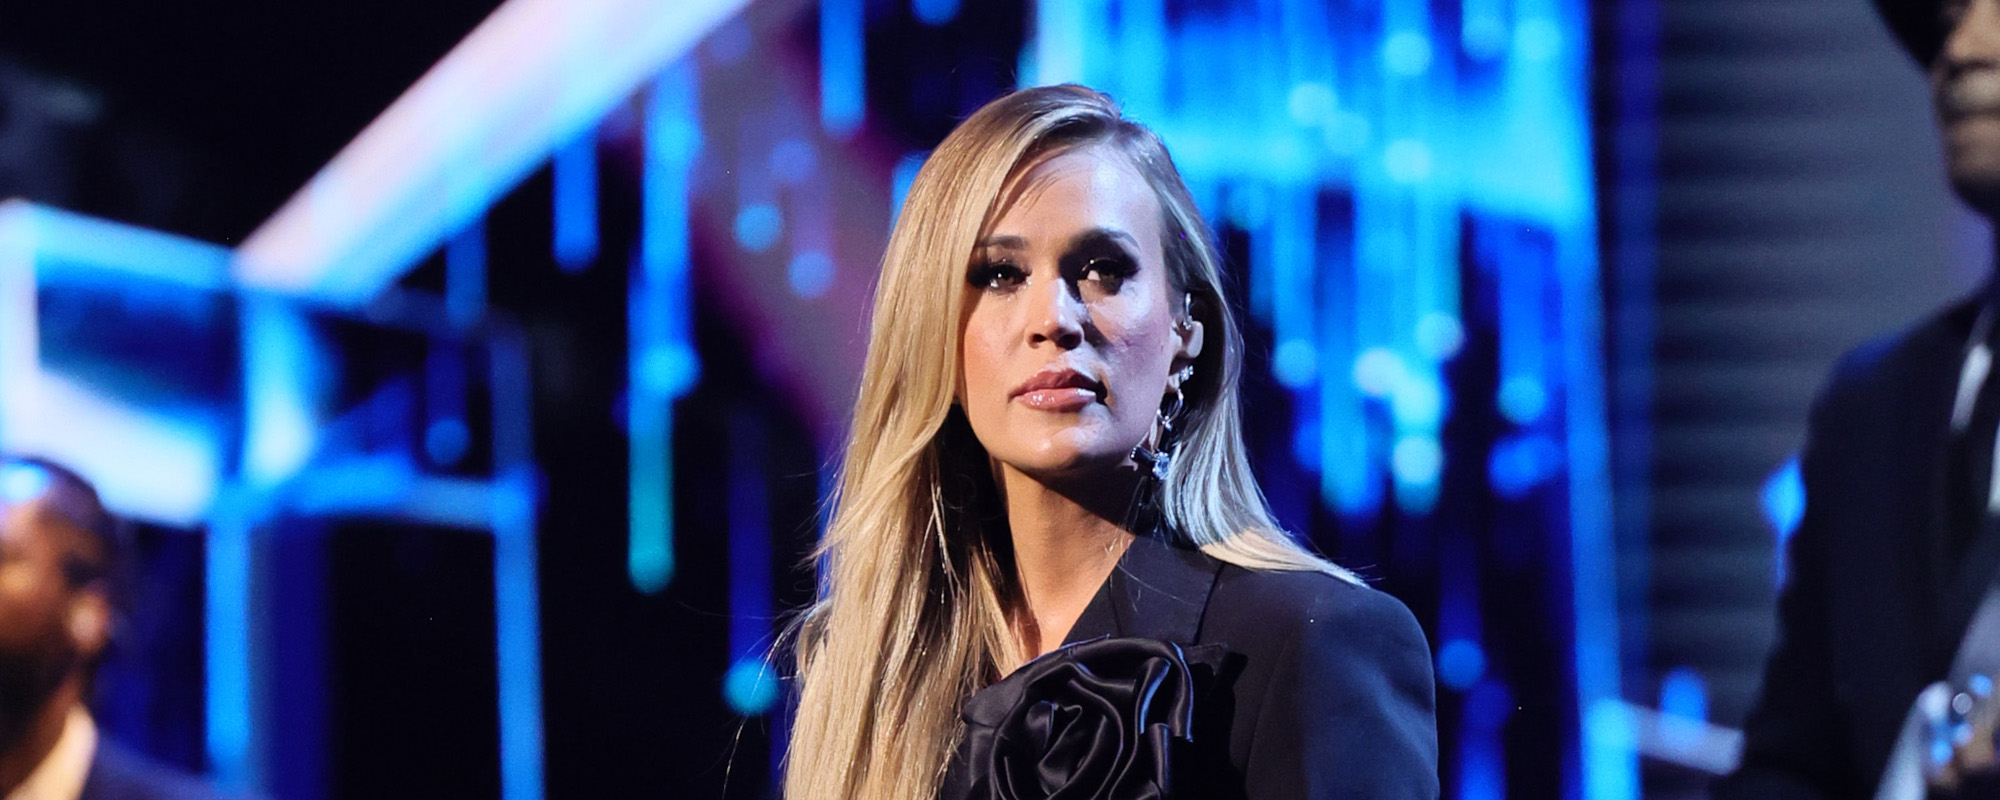 Why Wasn't Carrie Underwood at the 2023 CMA Awards?